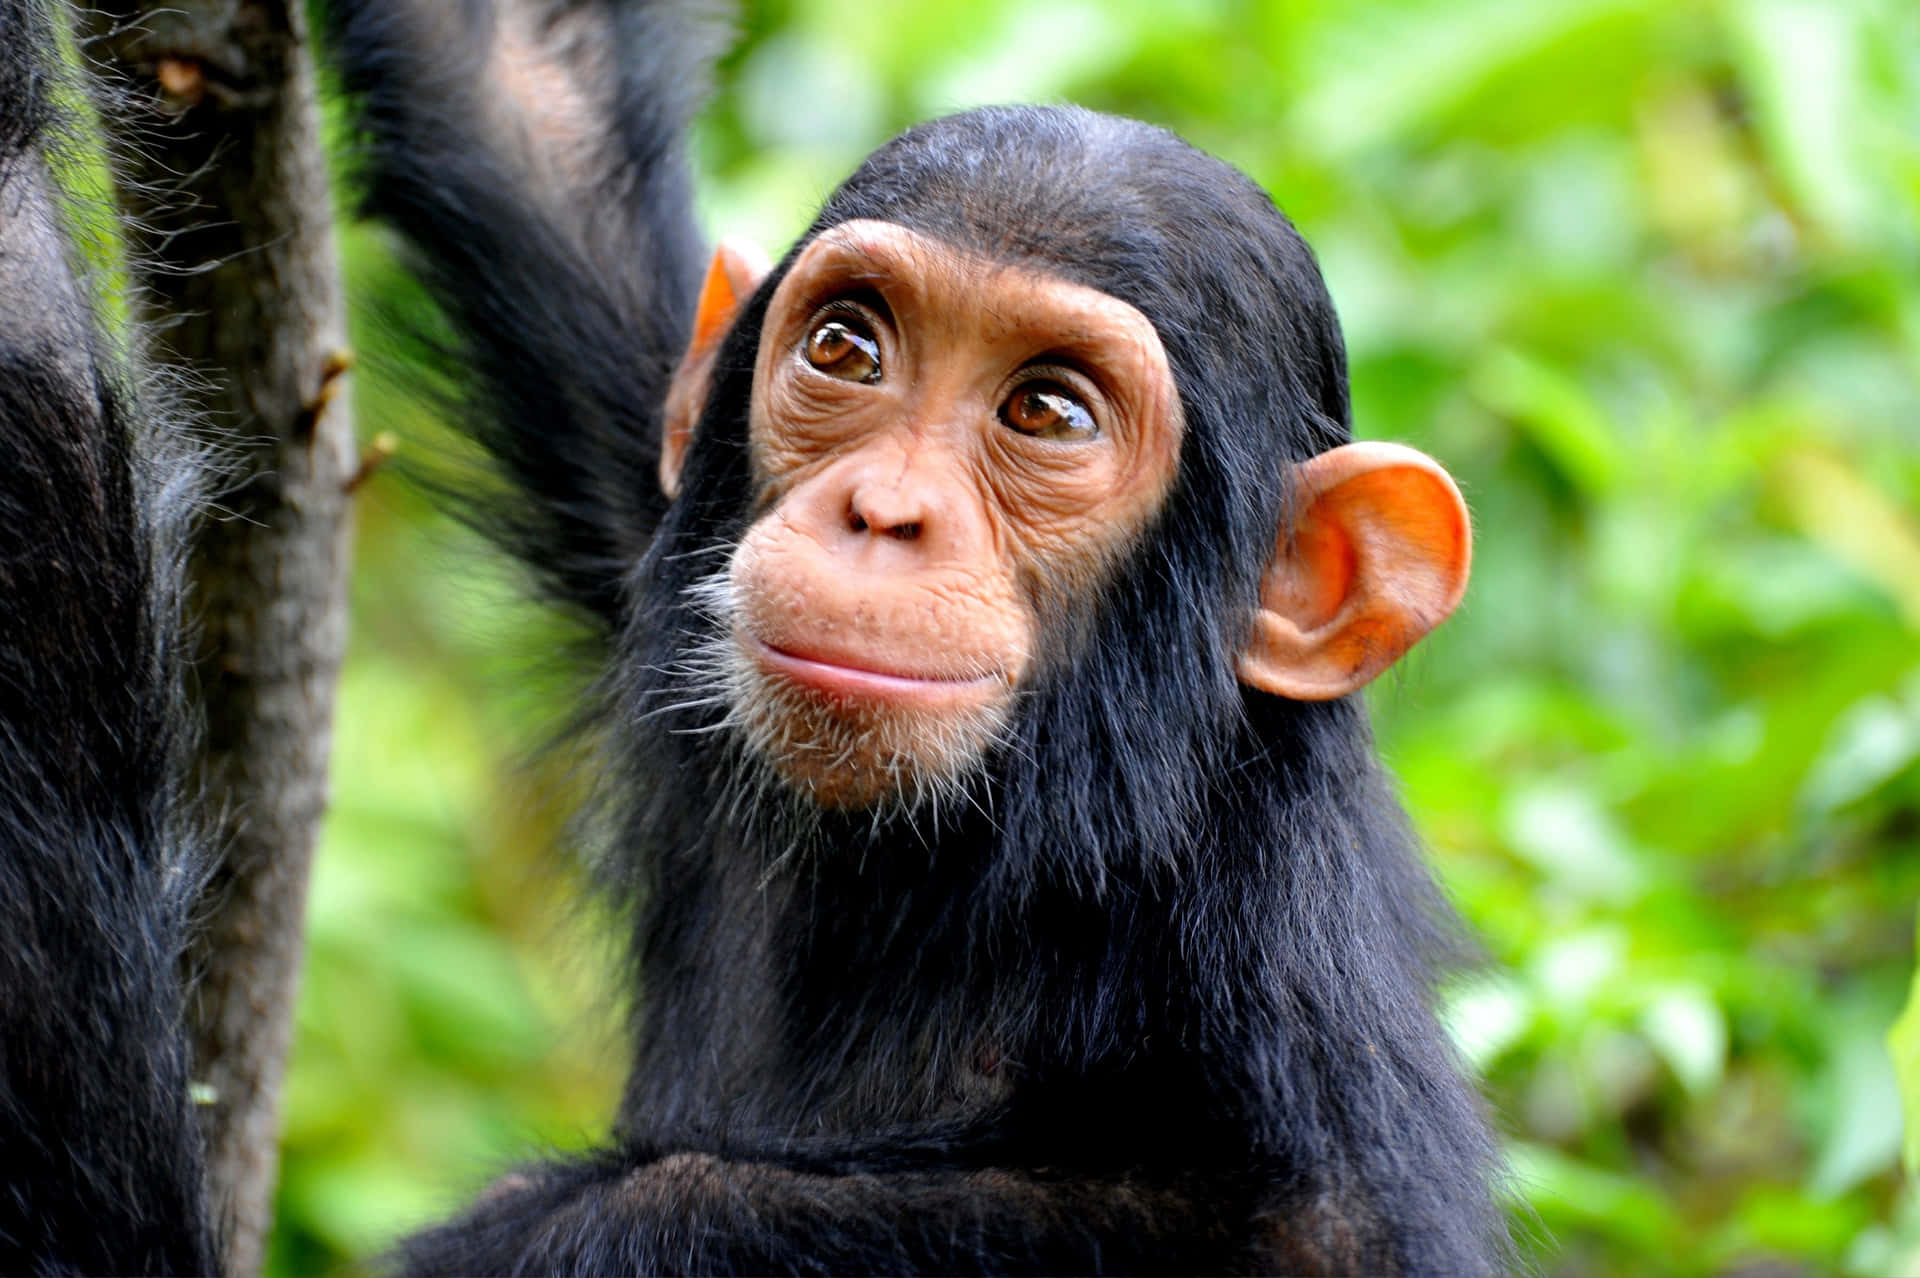 A curious chimpanzee looks back at the camera.